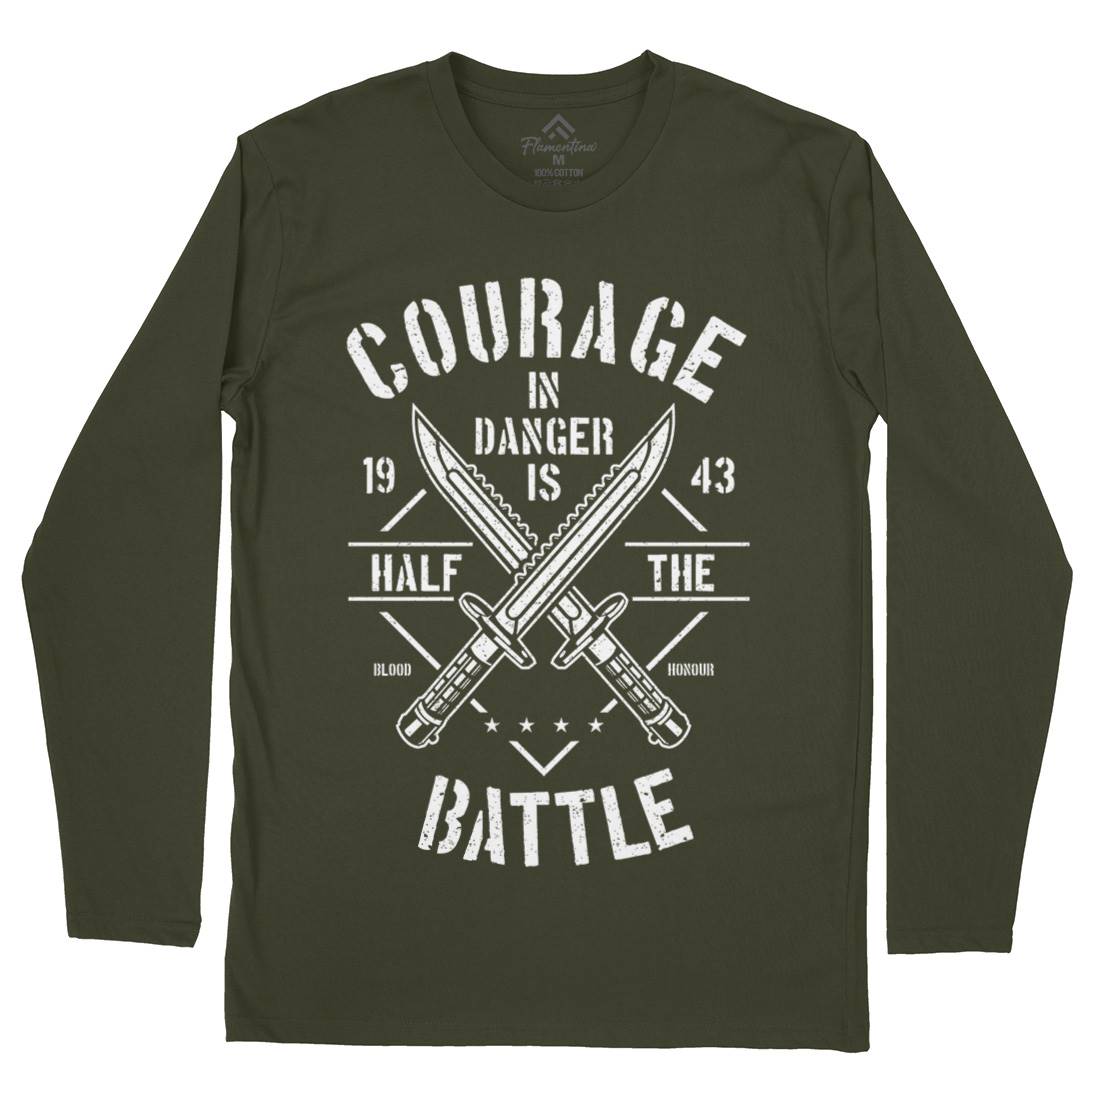 Courage In Danger Mens Long Sleeve T-Shirt Army A639